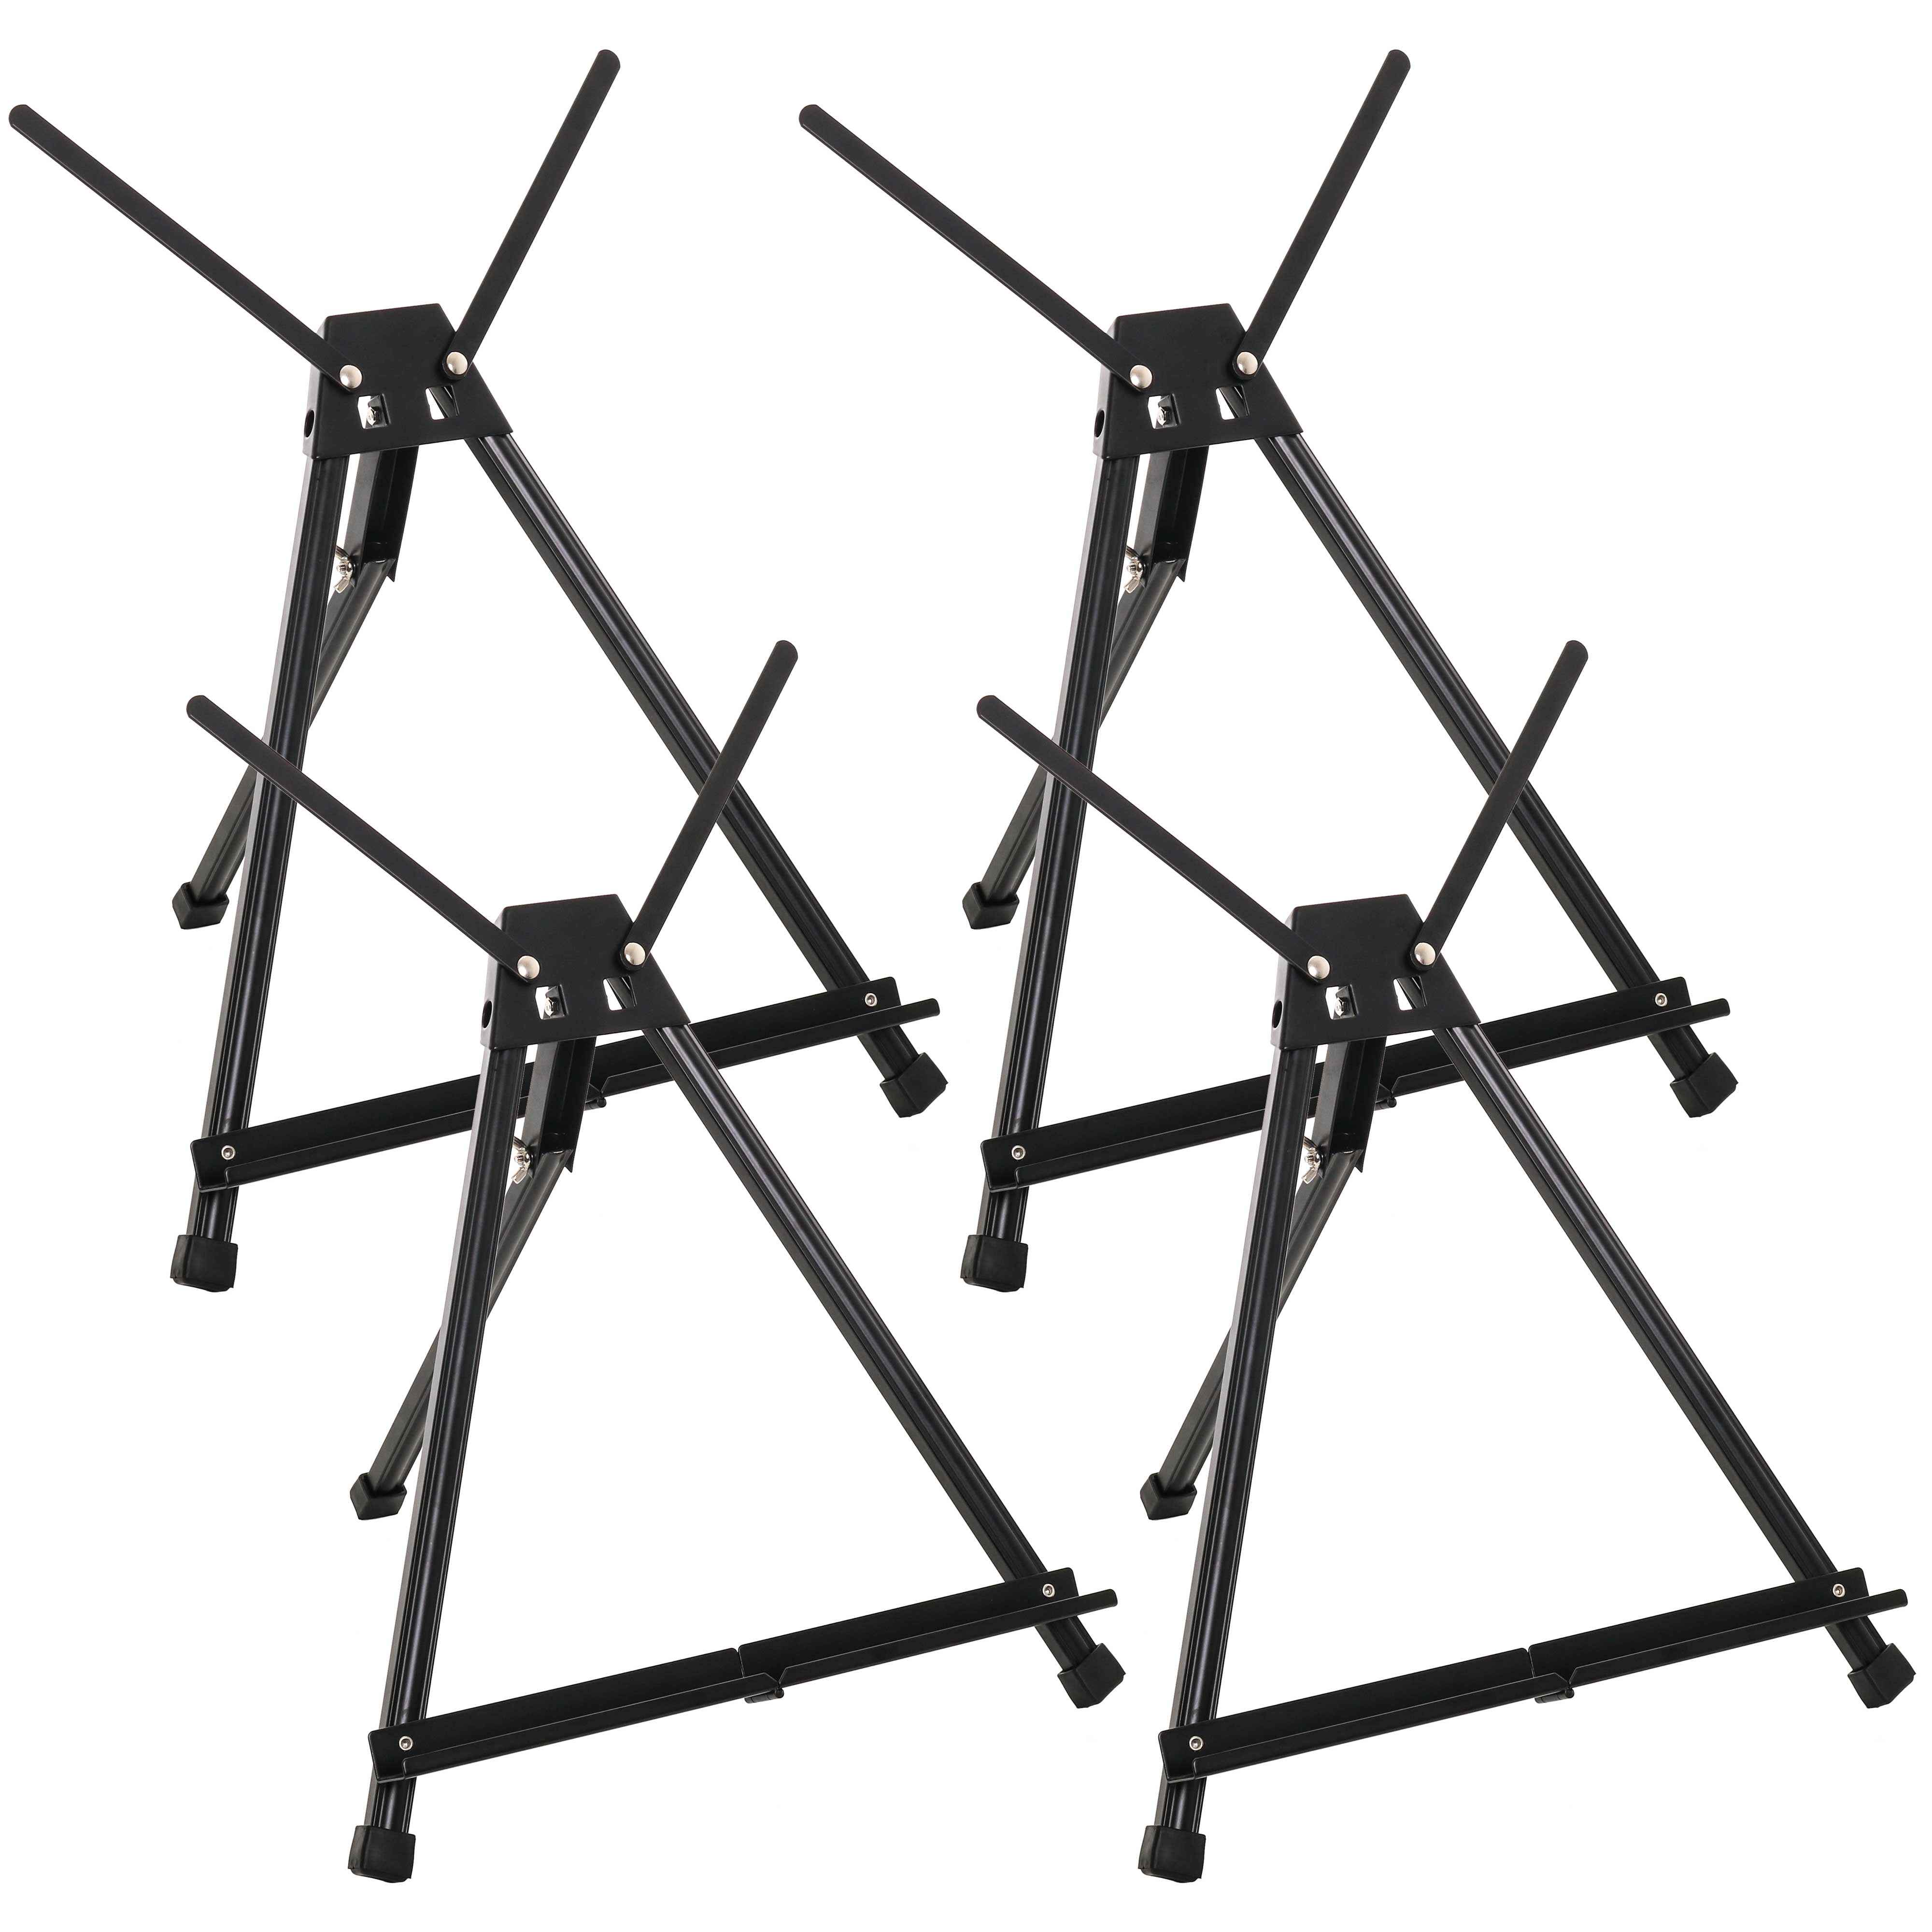 Nicpro Folding Easels for Display,6 Pack 63 Inch Metal Floor Easel